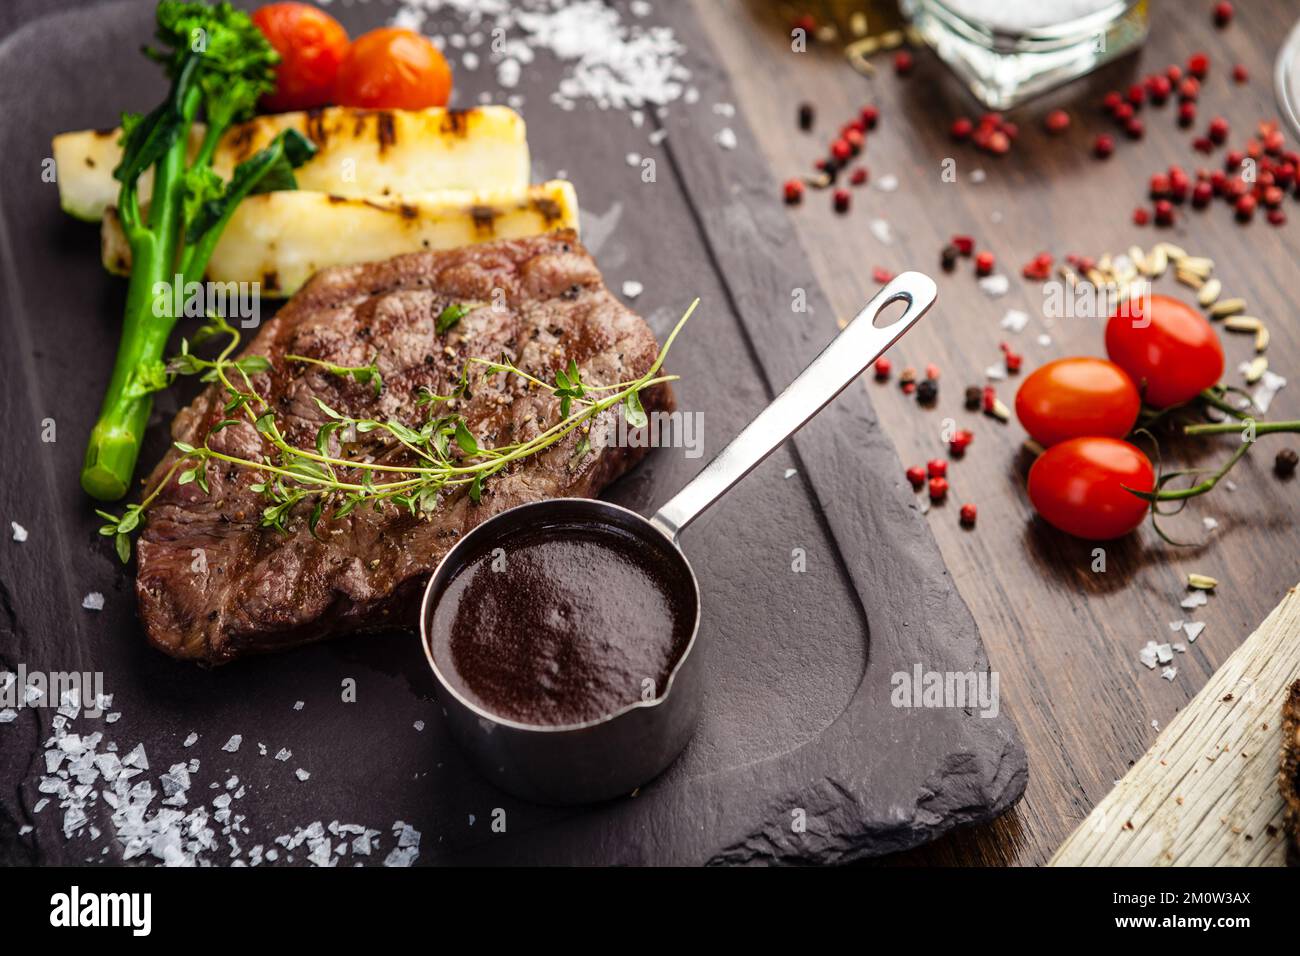 Black Angus New York steak. Marbled beef sirloin from Uruguay. Delicious healthy traditional food closeup served for lunch in modern gourmet cuisine r Stock Photo